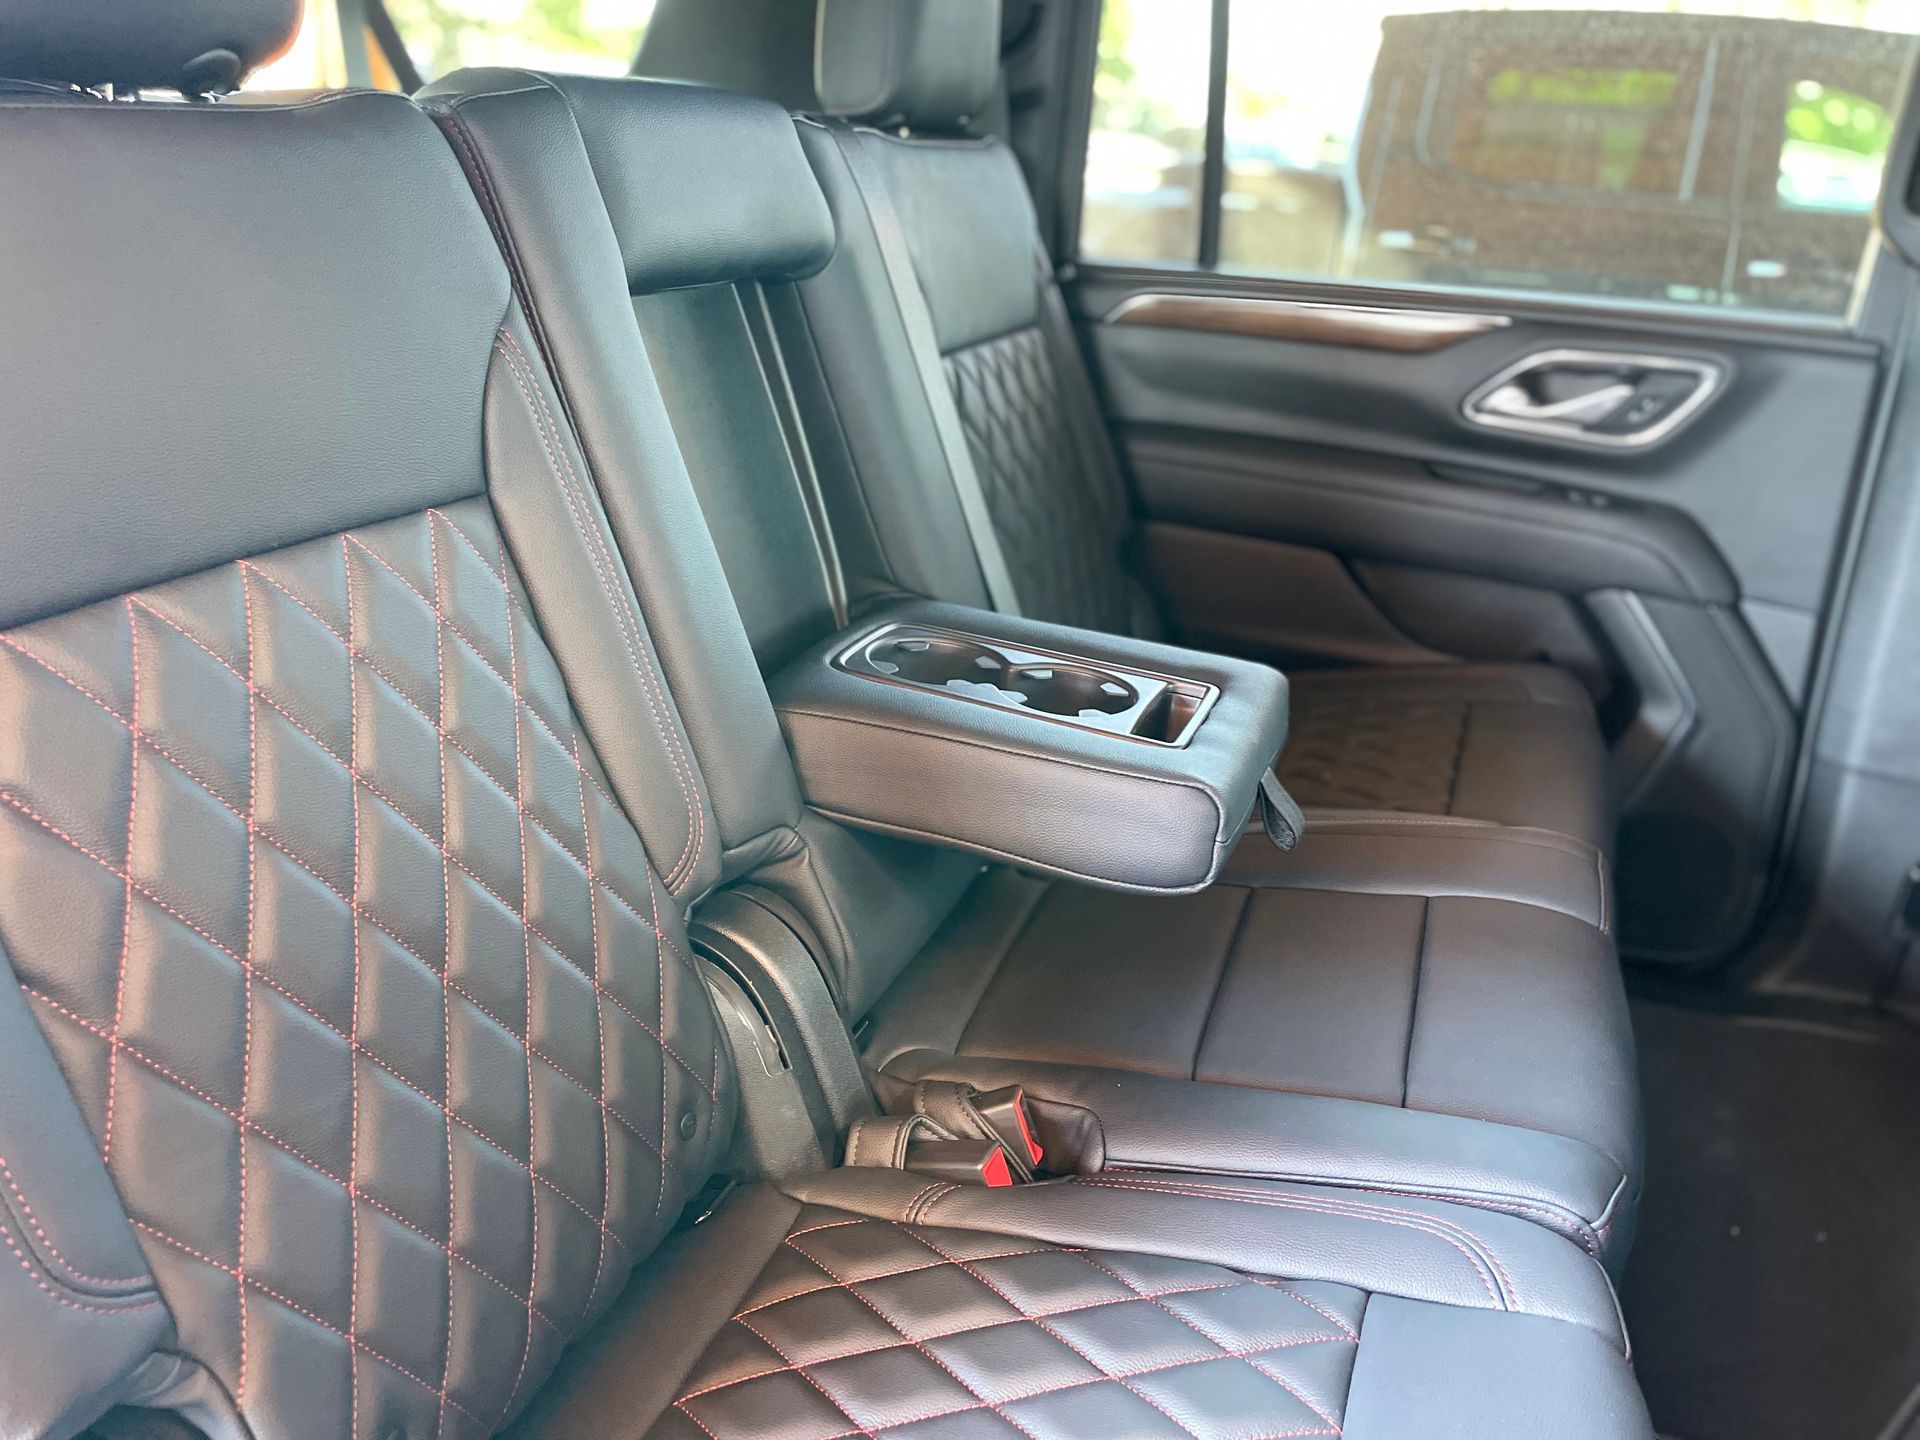 the second row seat of luxury Yukon SUV with cup holder on the arm rest